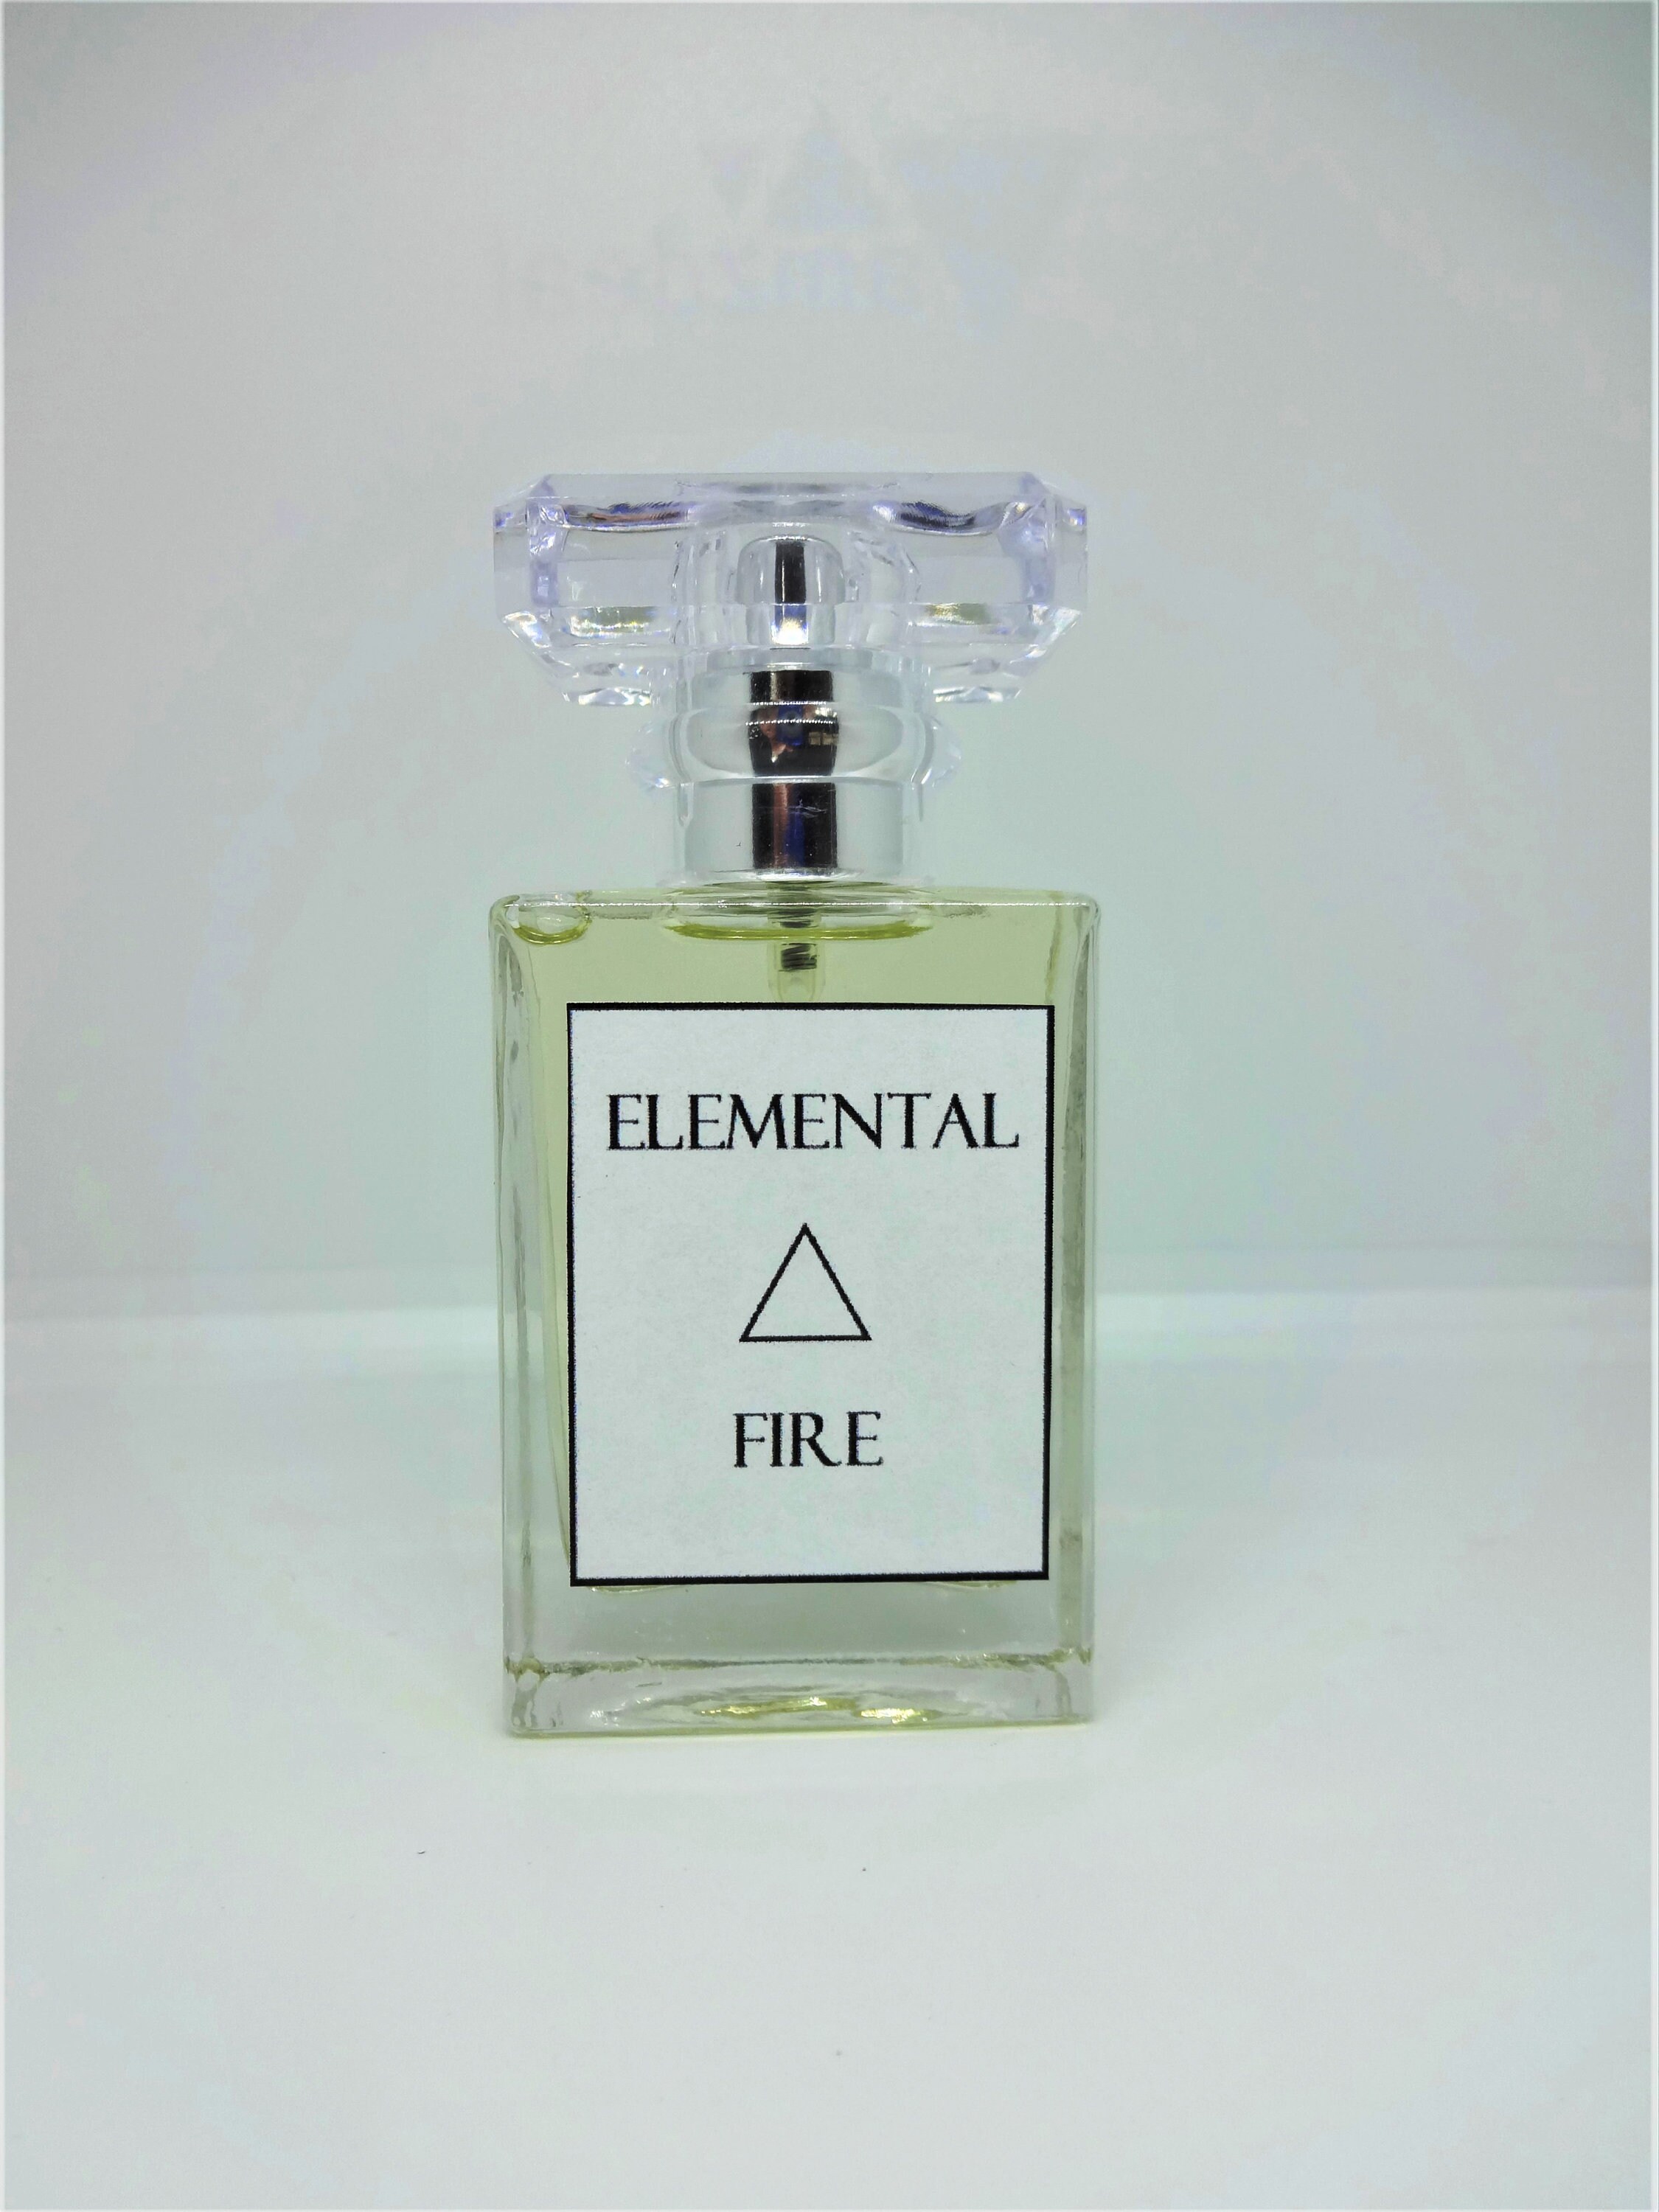 Elemental Fire Cologne Essential Oil Cologne Spicy | Etsy